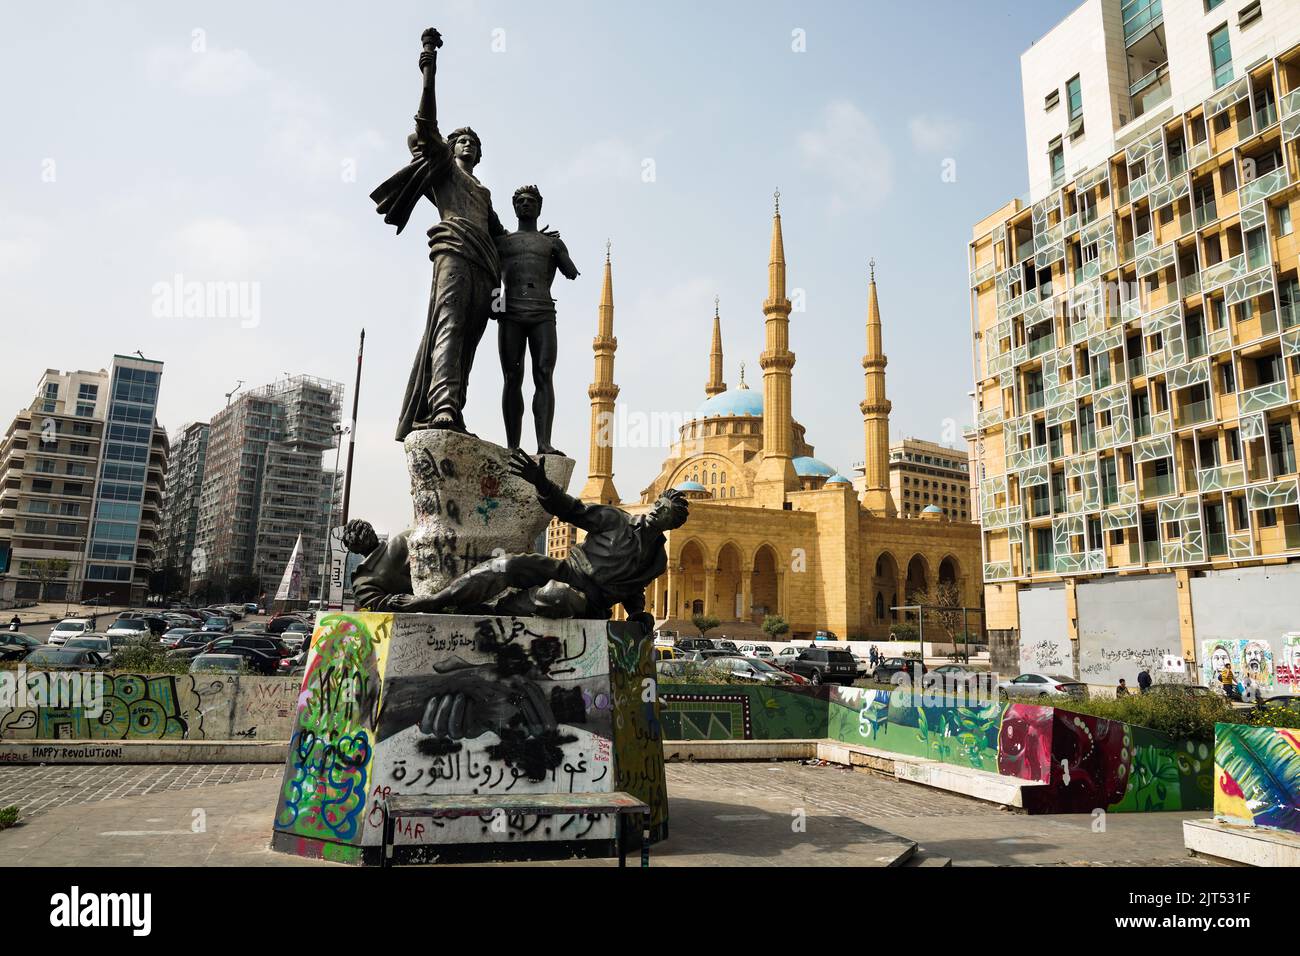 Beirut, Lebanon: Monument commemorating the martyrs executed by the Ottomans, riddled with bullet holes from the Lebanese Civil War, Martyrs' Square. In the background the Mohammad Al-Amin Sunni Muslim Mosque, also called the Blue Mosque, downtown, Lebanon Stock Photo